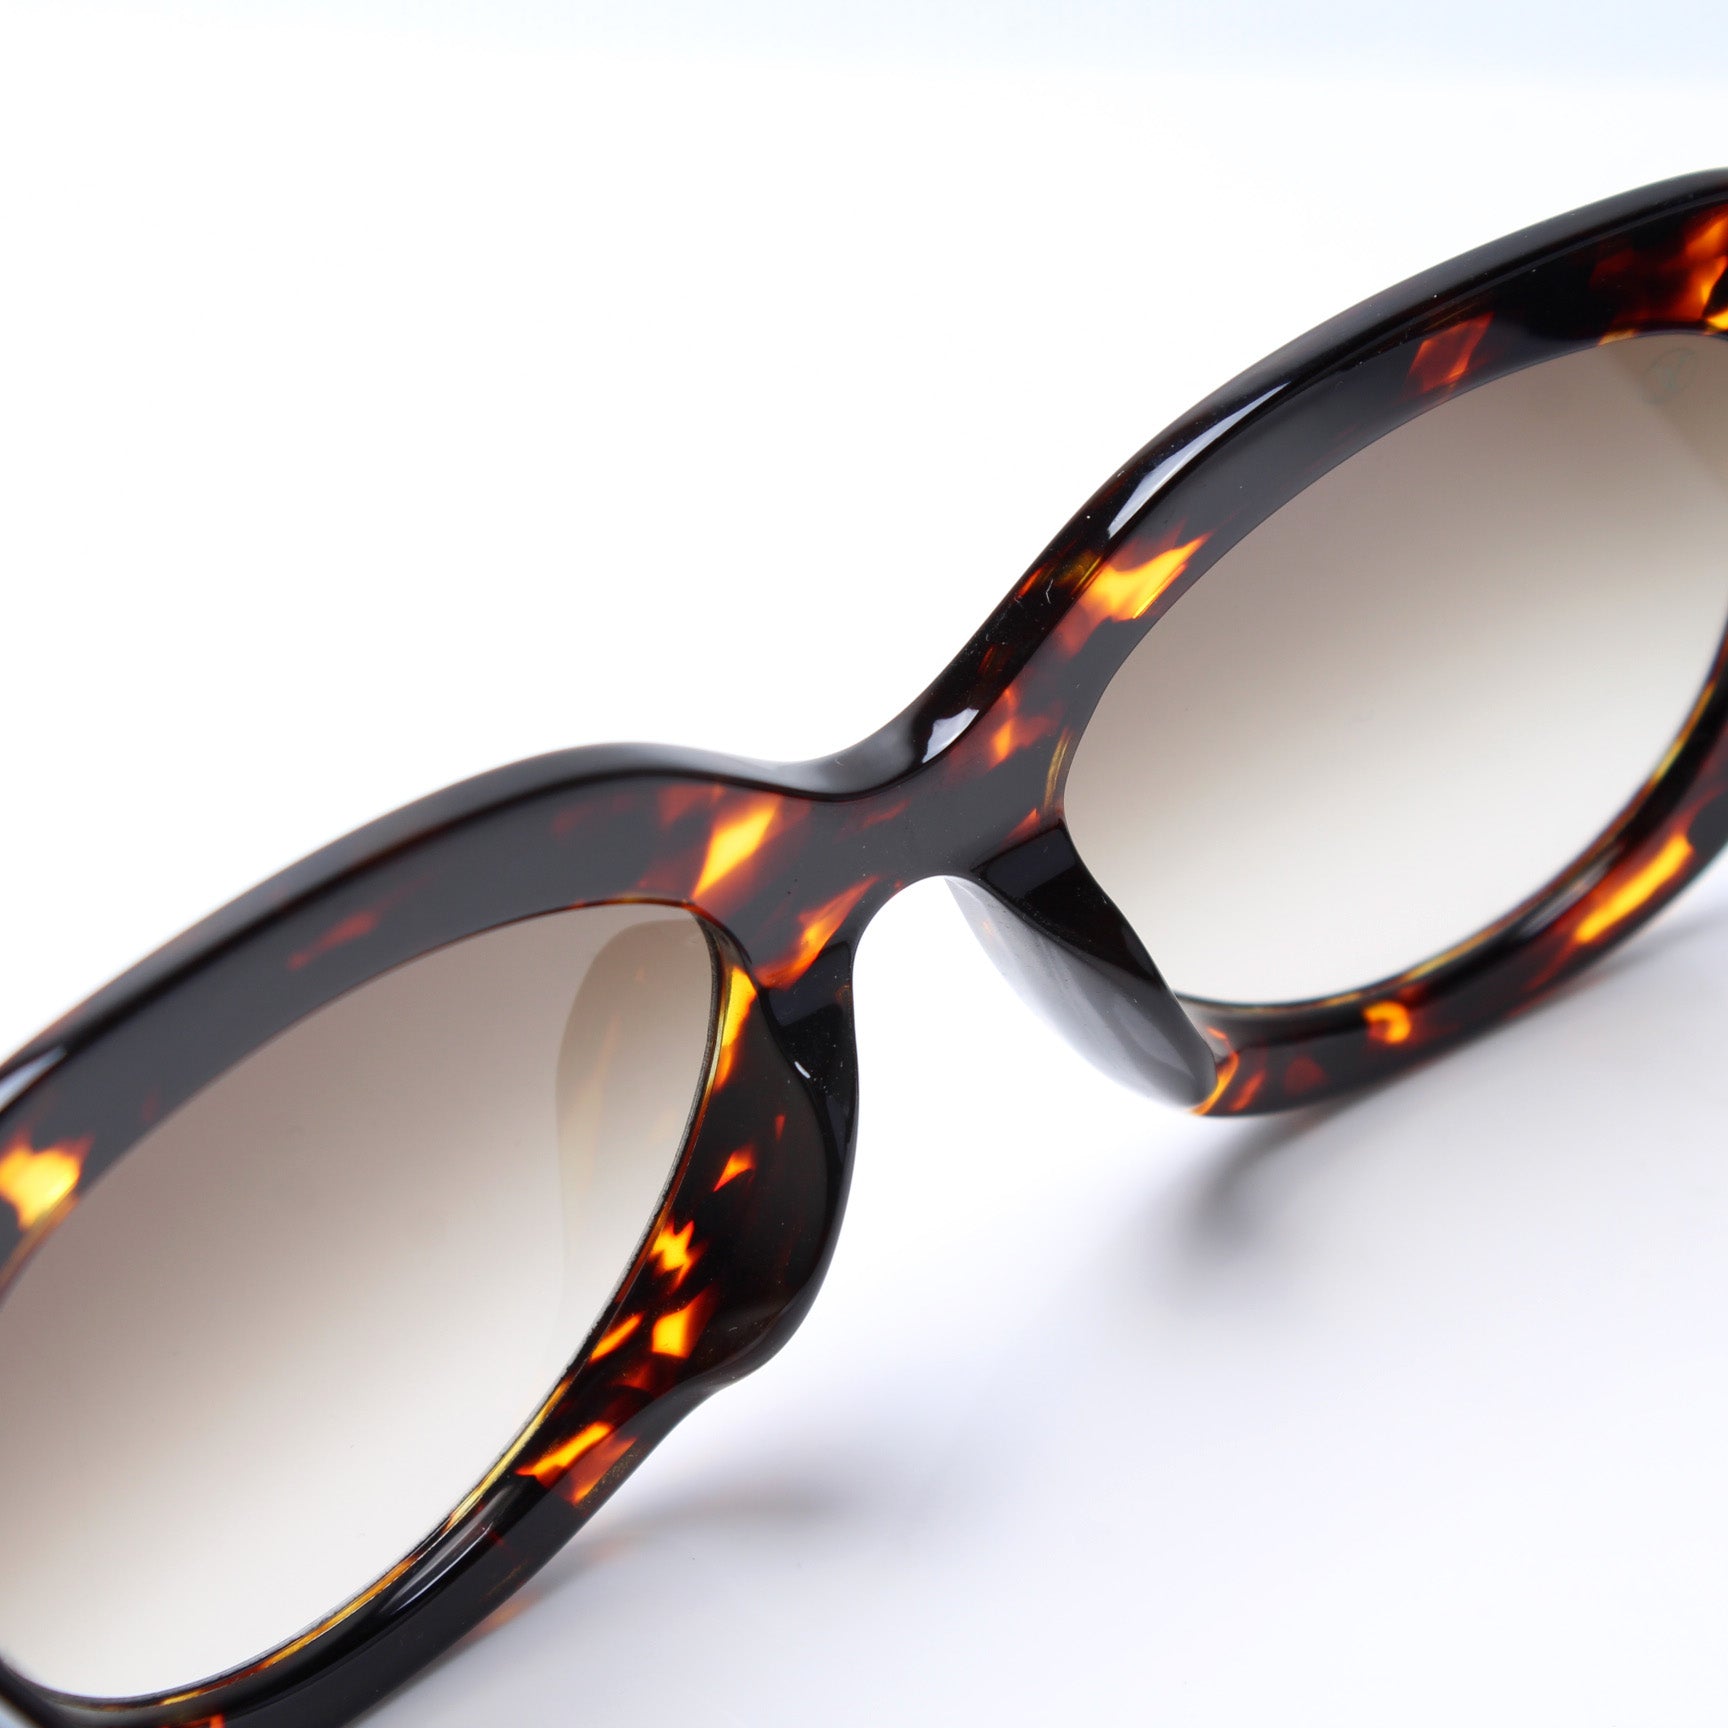 Louis Vuitton - Tortoise Sunglasses – Every Watch Has a Story